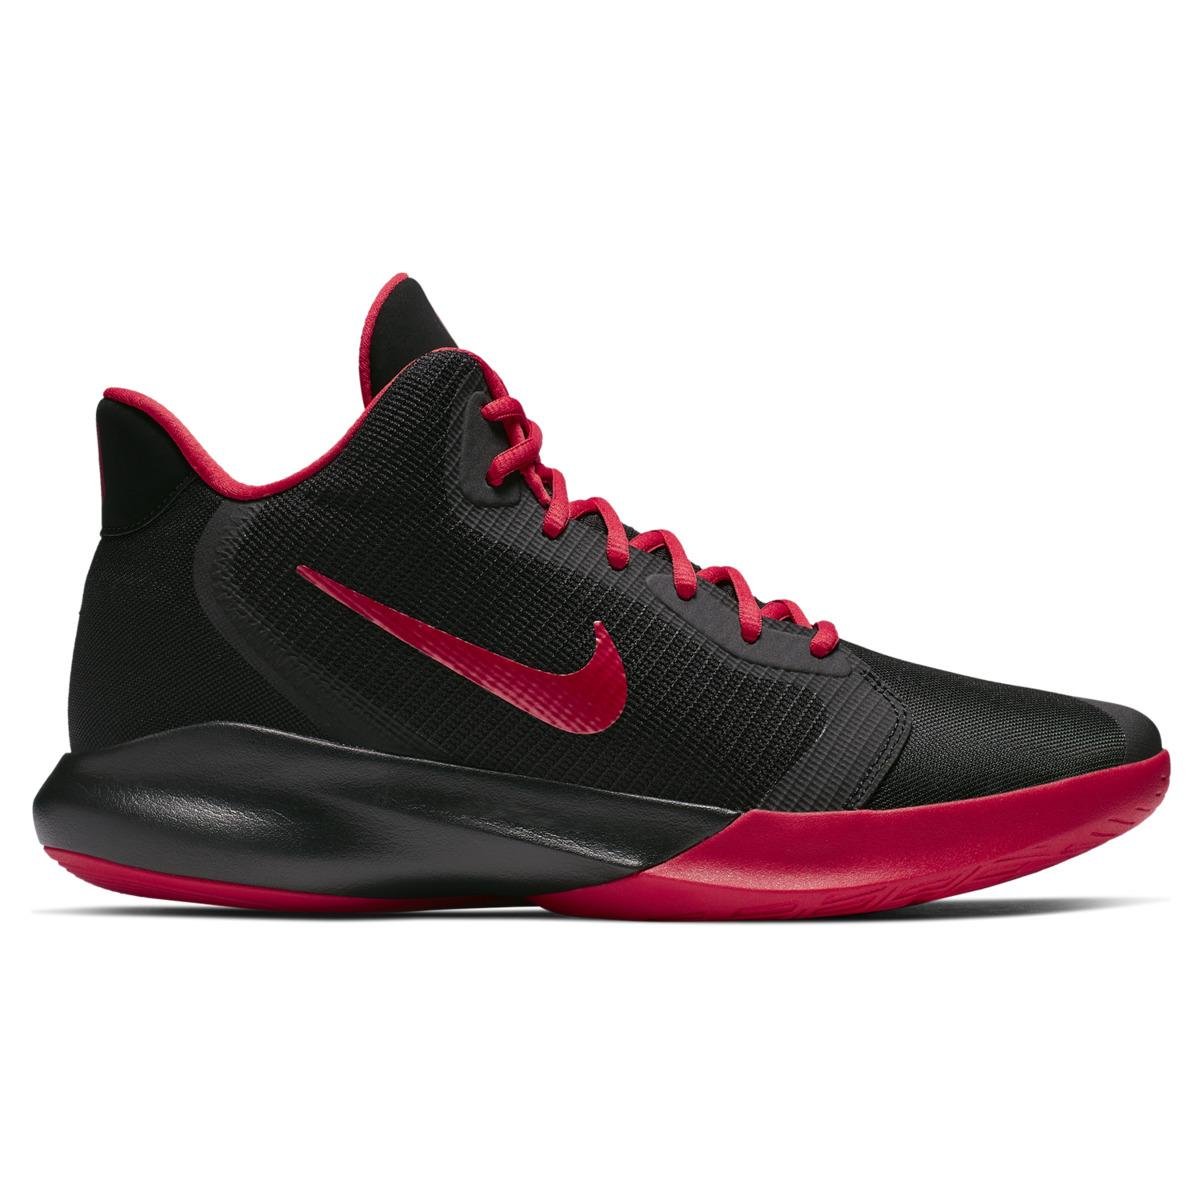 nike basketball shoes release 2019,Save up to 18%,www.masserv.com